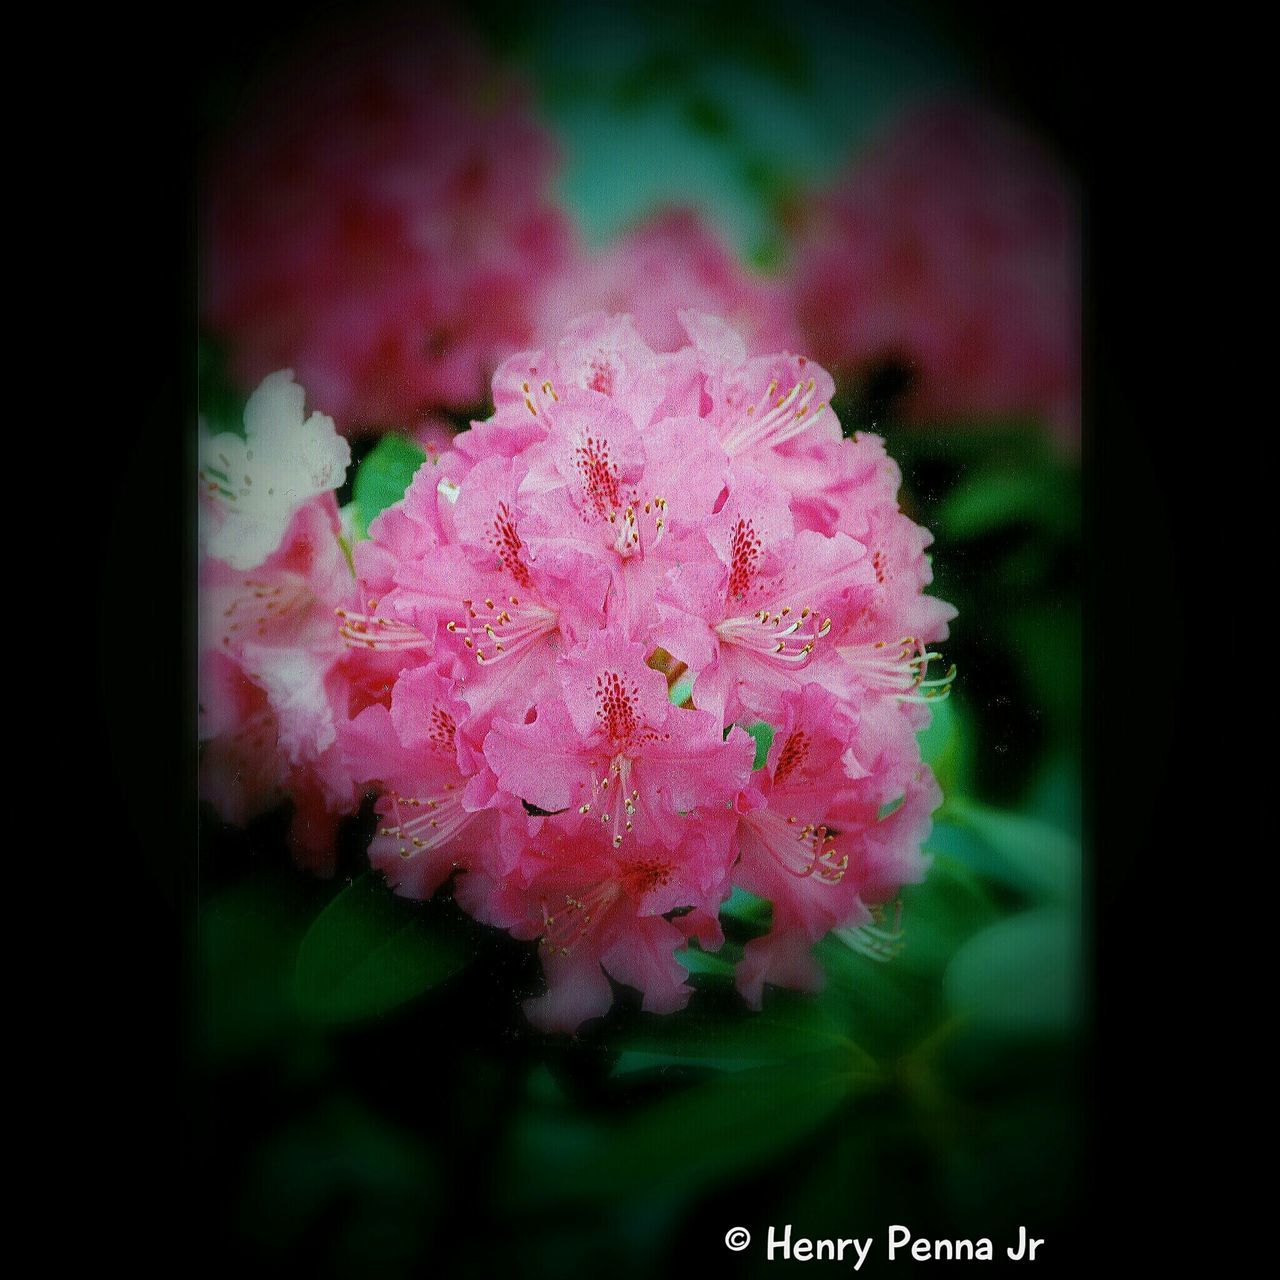 flower, pink color, freshness, fragility, growth, beauty in nature, petal, close-up, nature, flower head, blooming, pink, plant, focus on foreground, in bloom, selective focus, blossom, outdoors, auto post production filter, botany